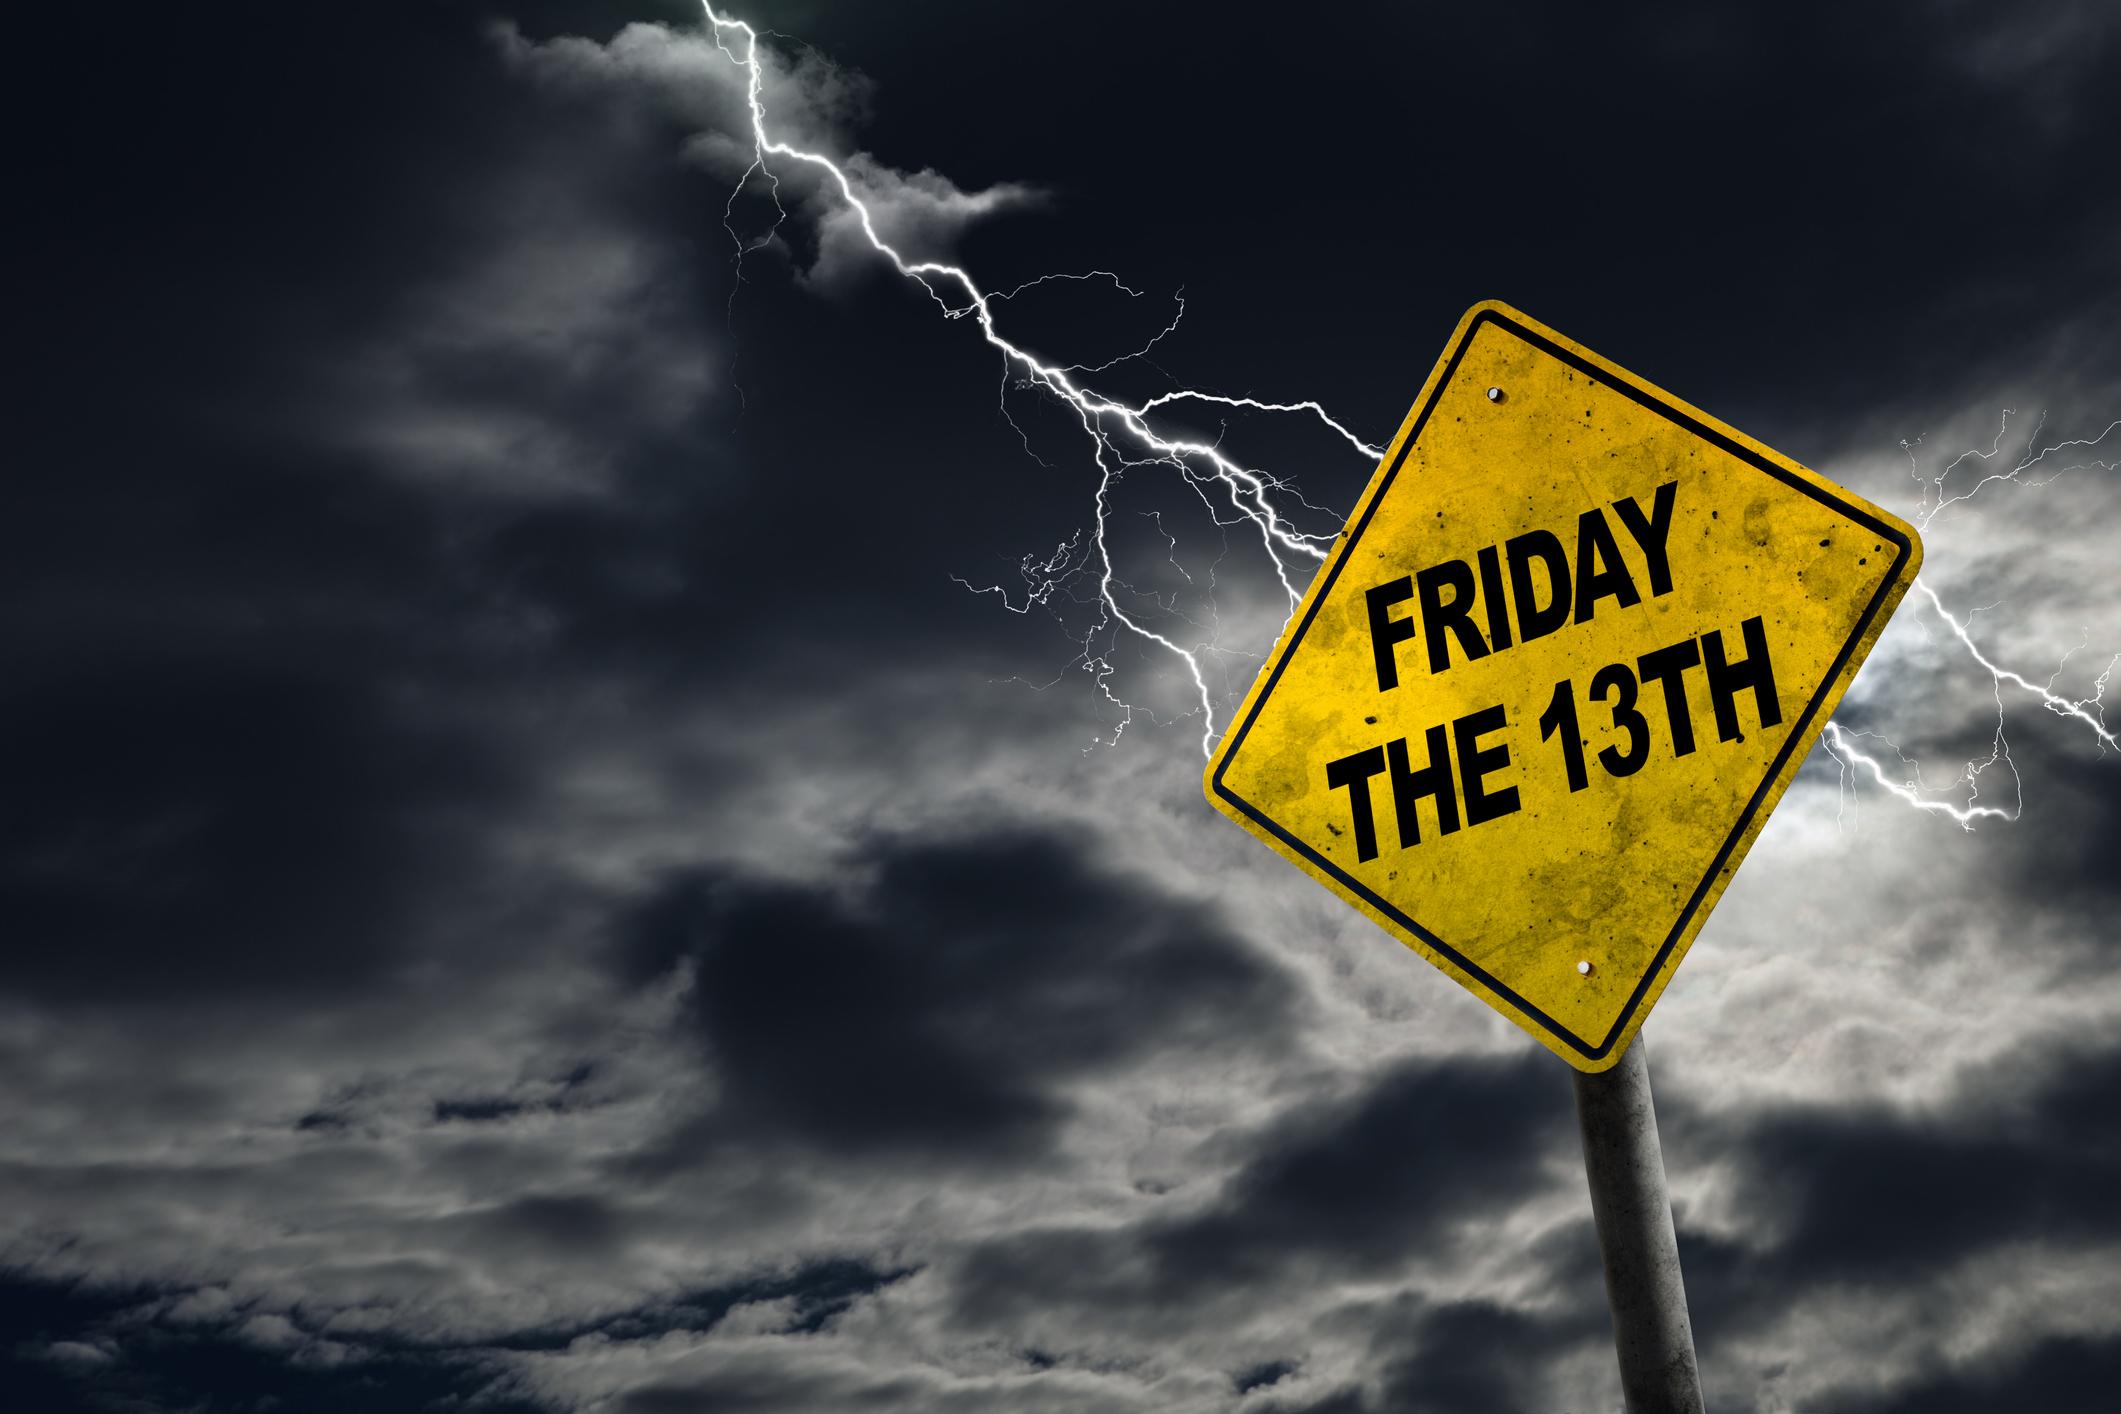 Friday the 13th sign being struck by lightening